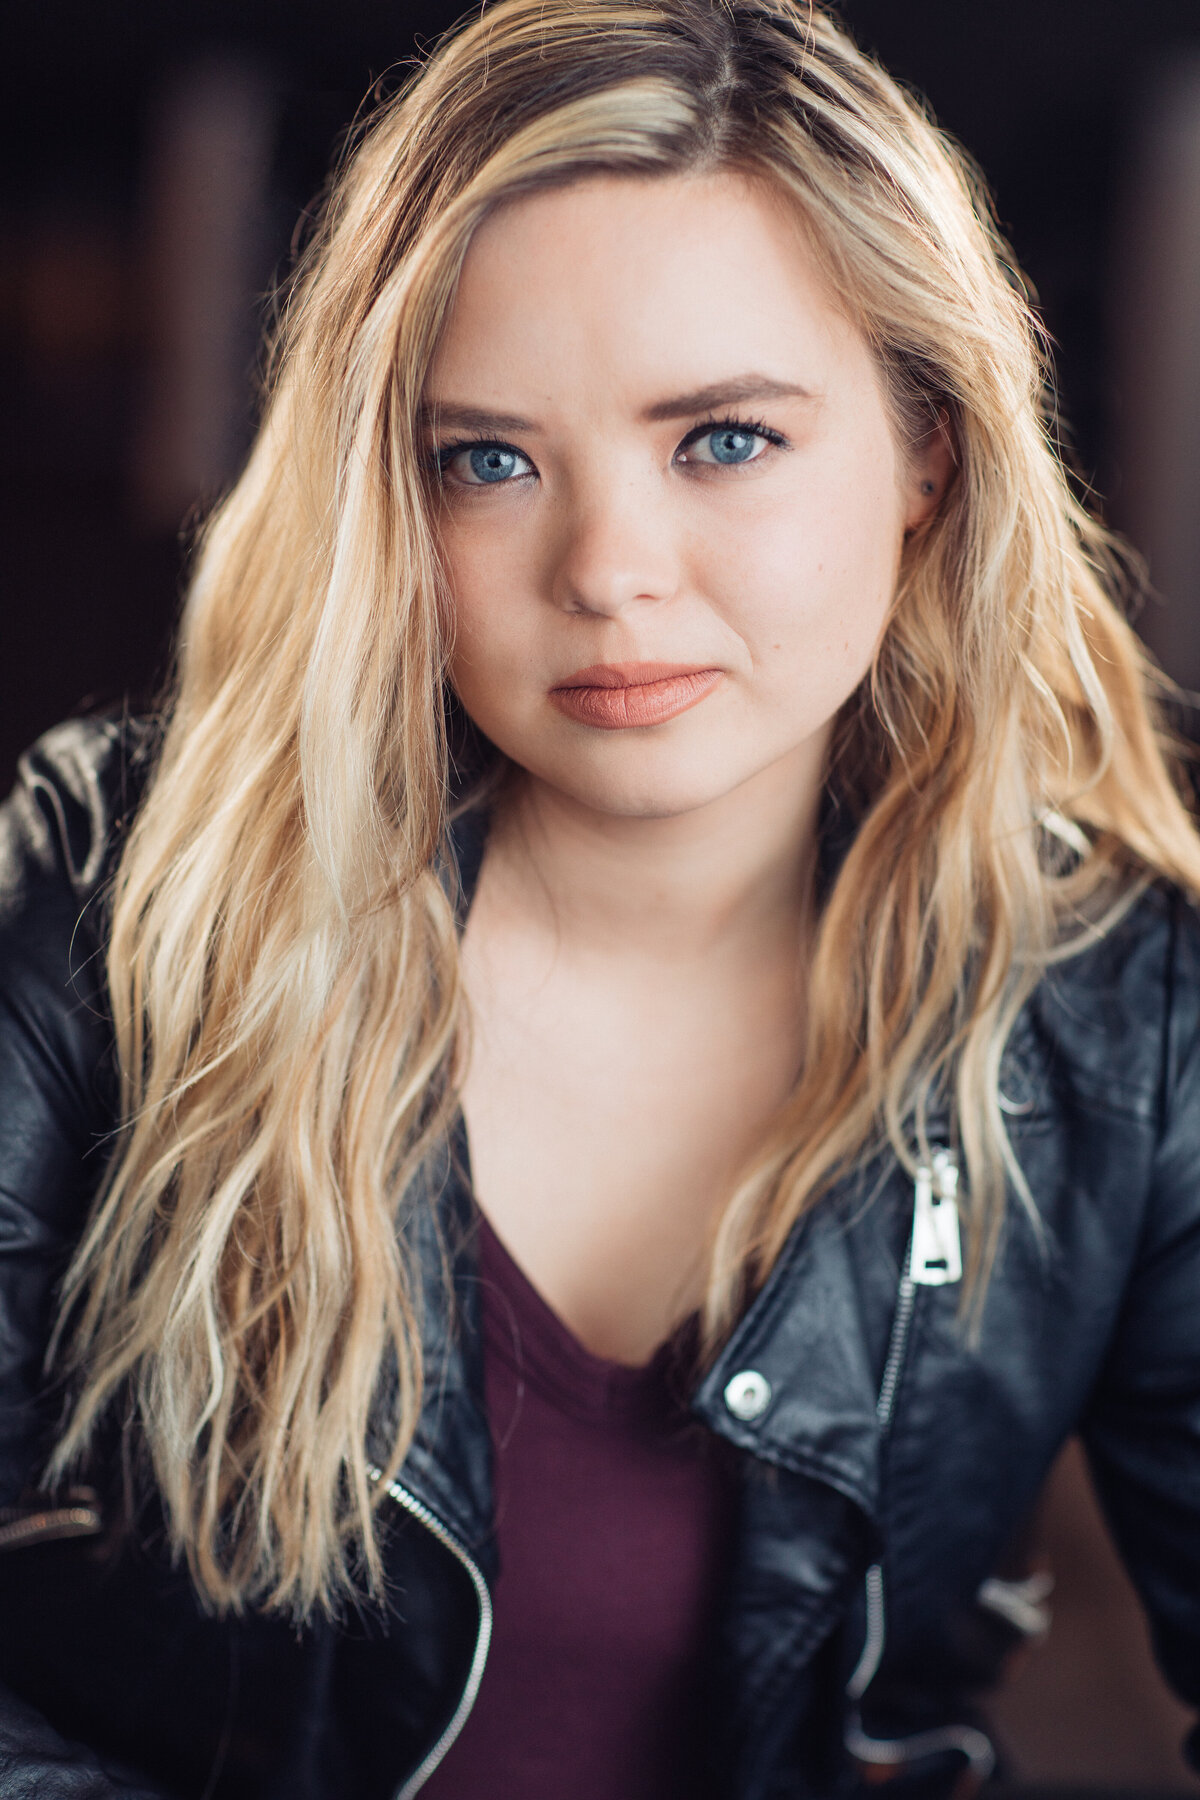 Headshot Photograph Of Young Woman In Black Leather Jacket And Inner Violet Shirt Los Angeles